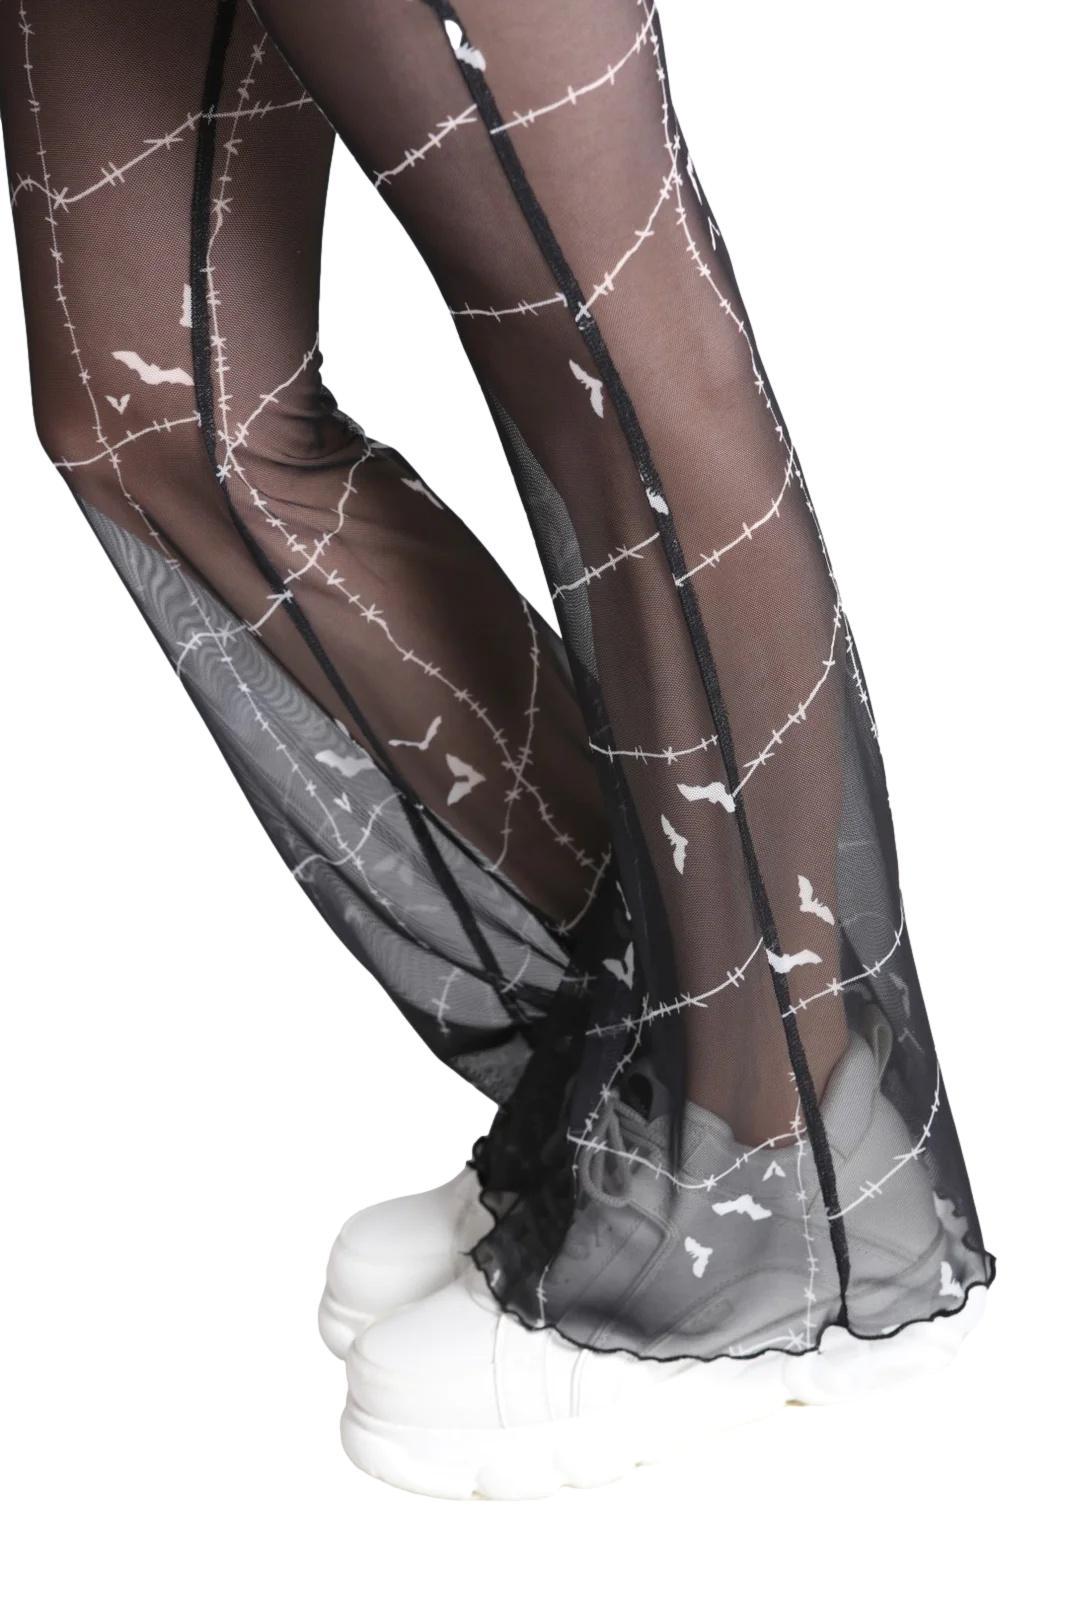 Hell Bunny Stitches Gothic Mesh Sheer Pants